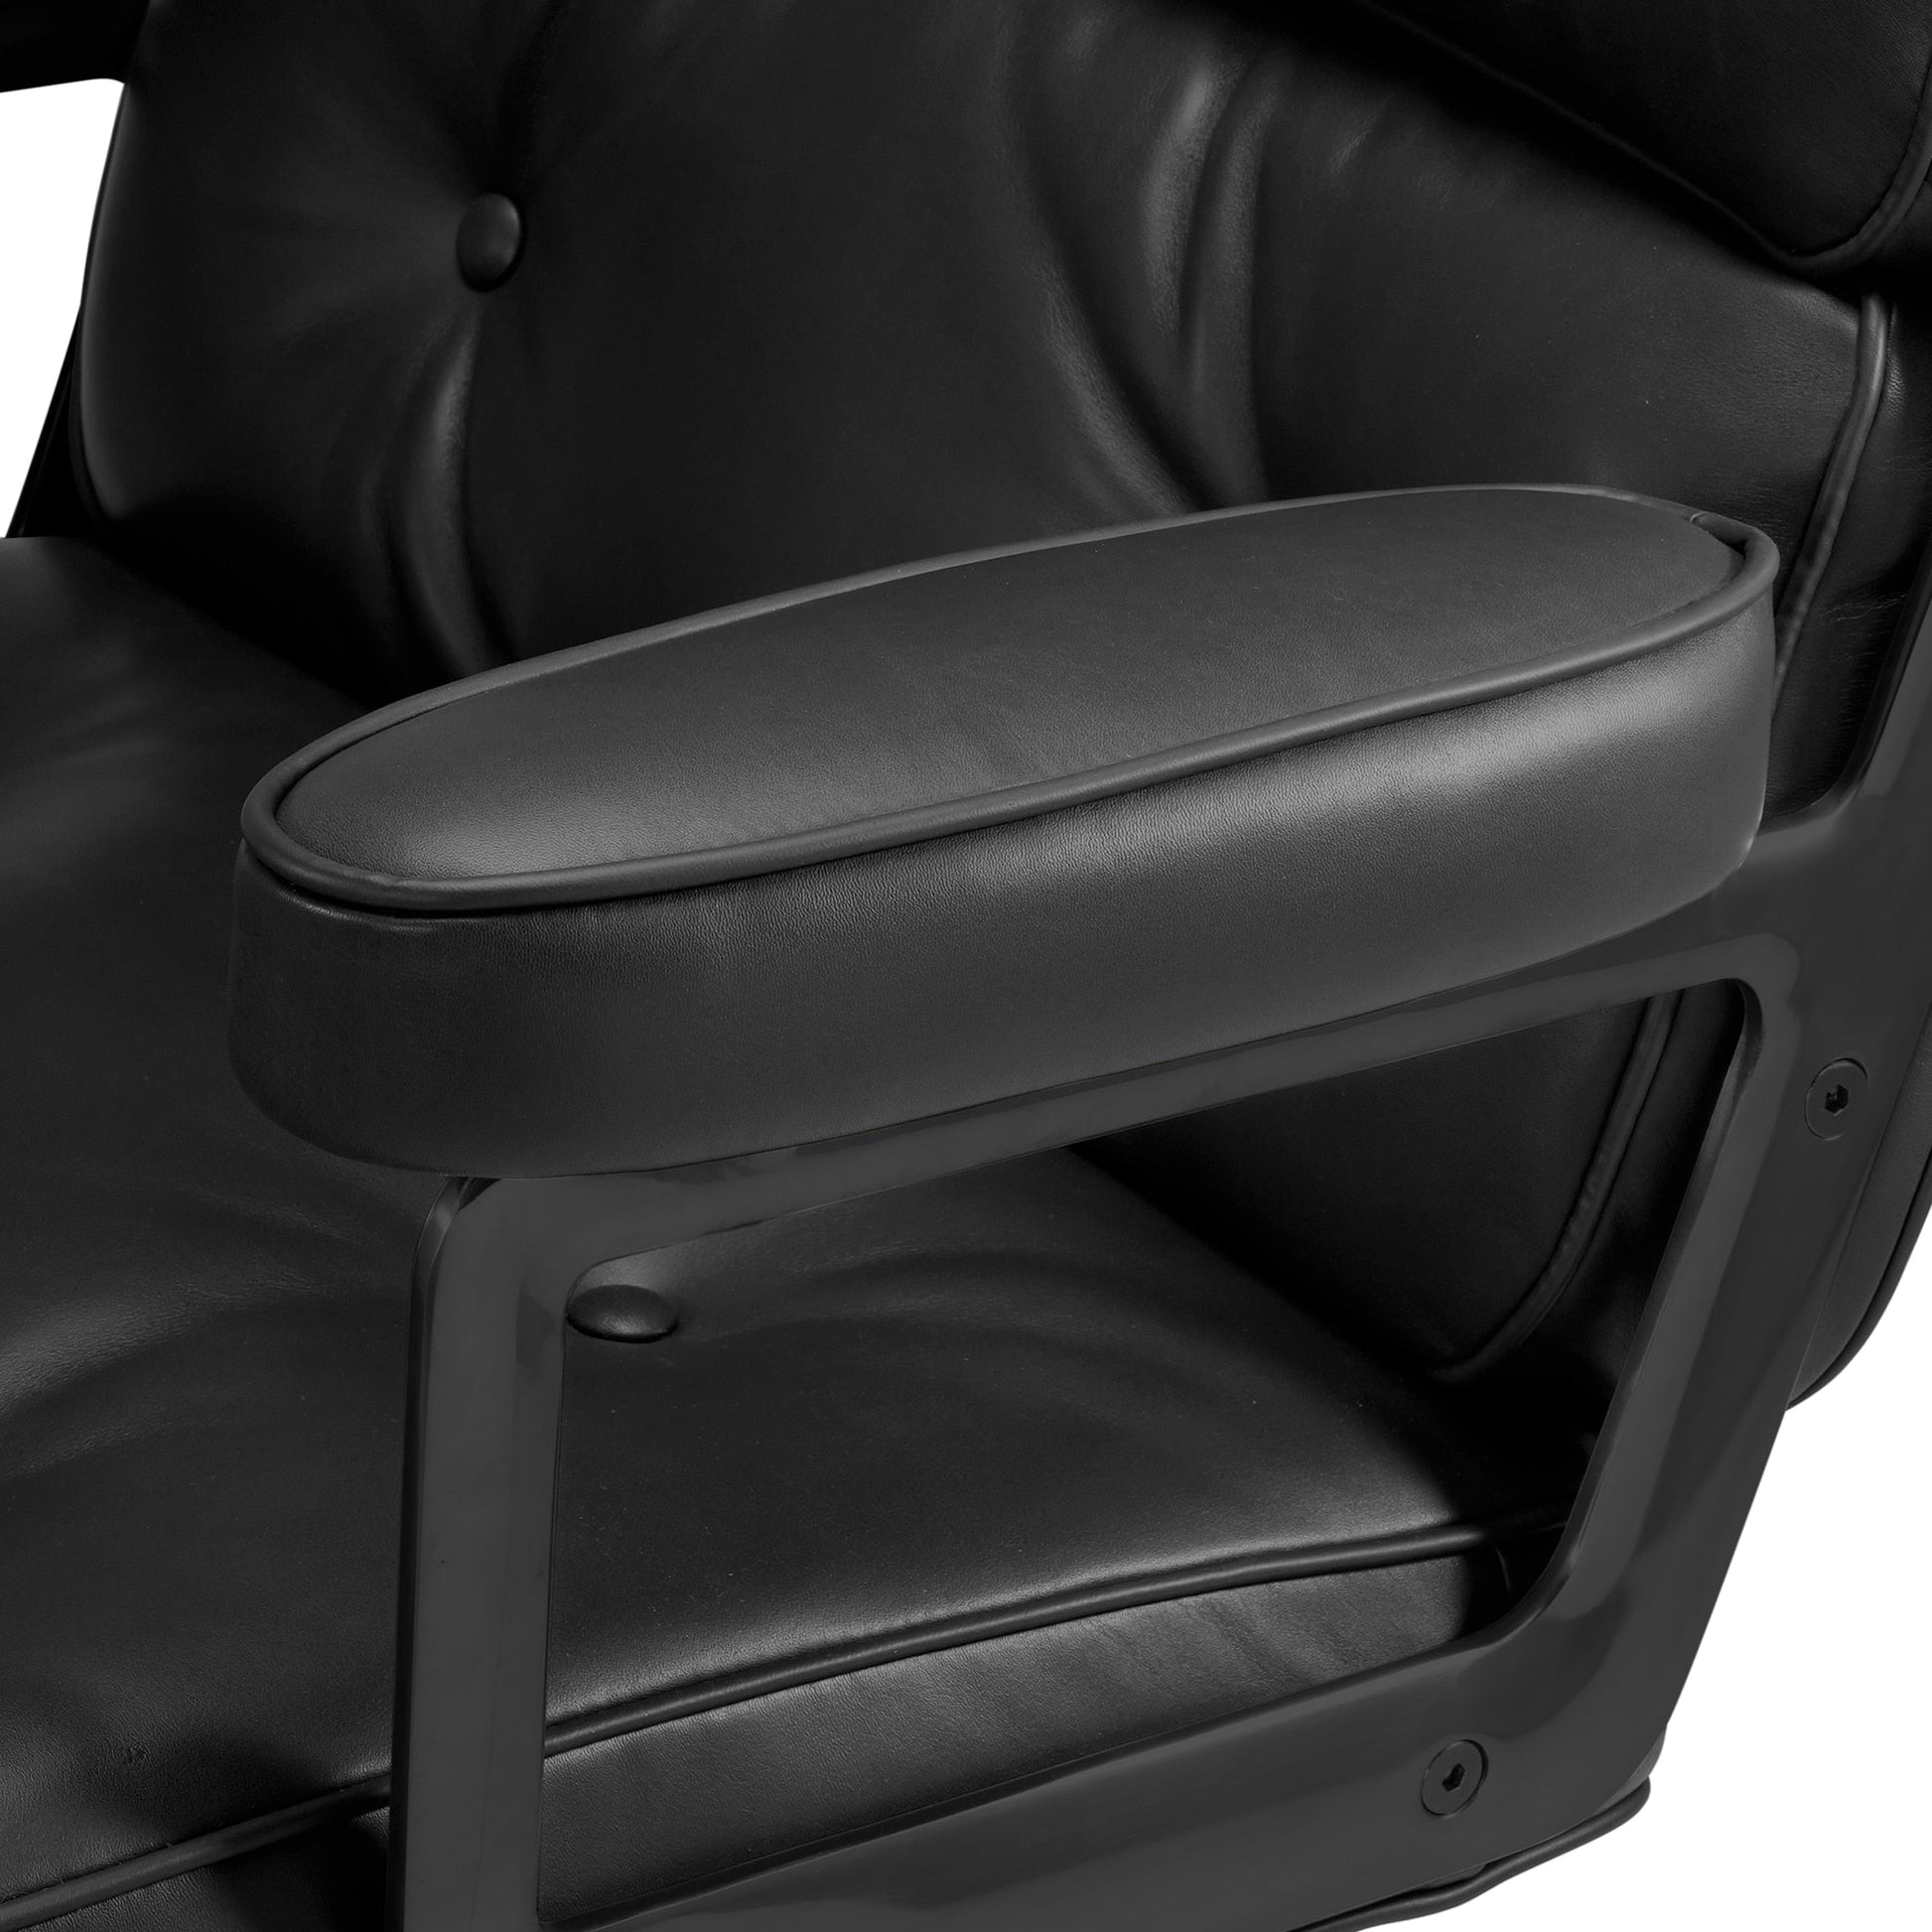 Arthia Designs - Eames Mid-Century Executive Office Leather Chair - Review